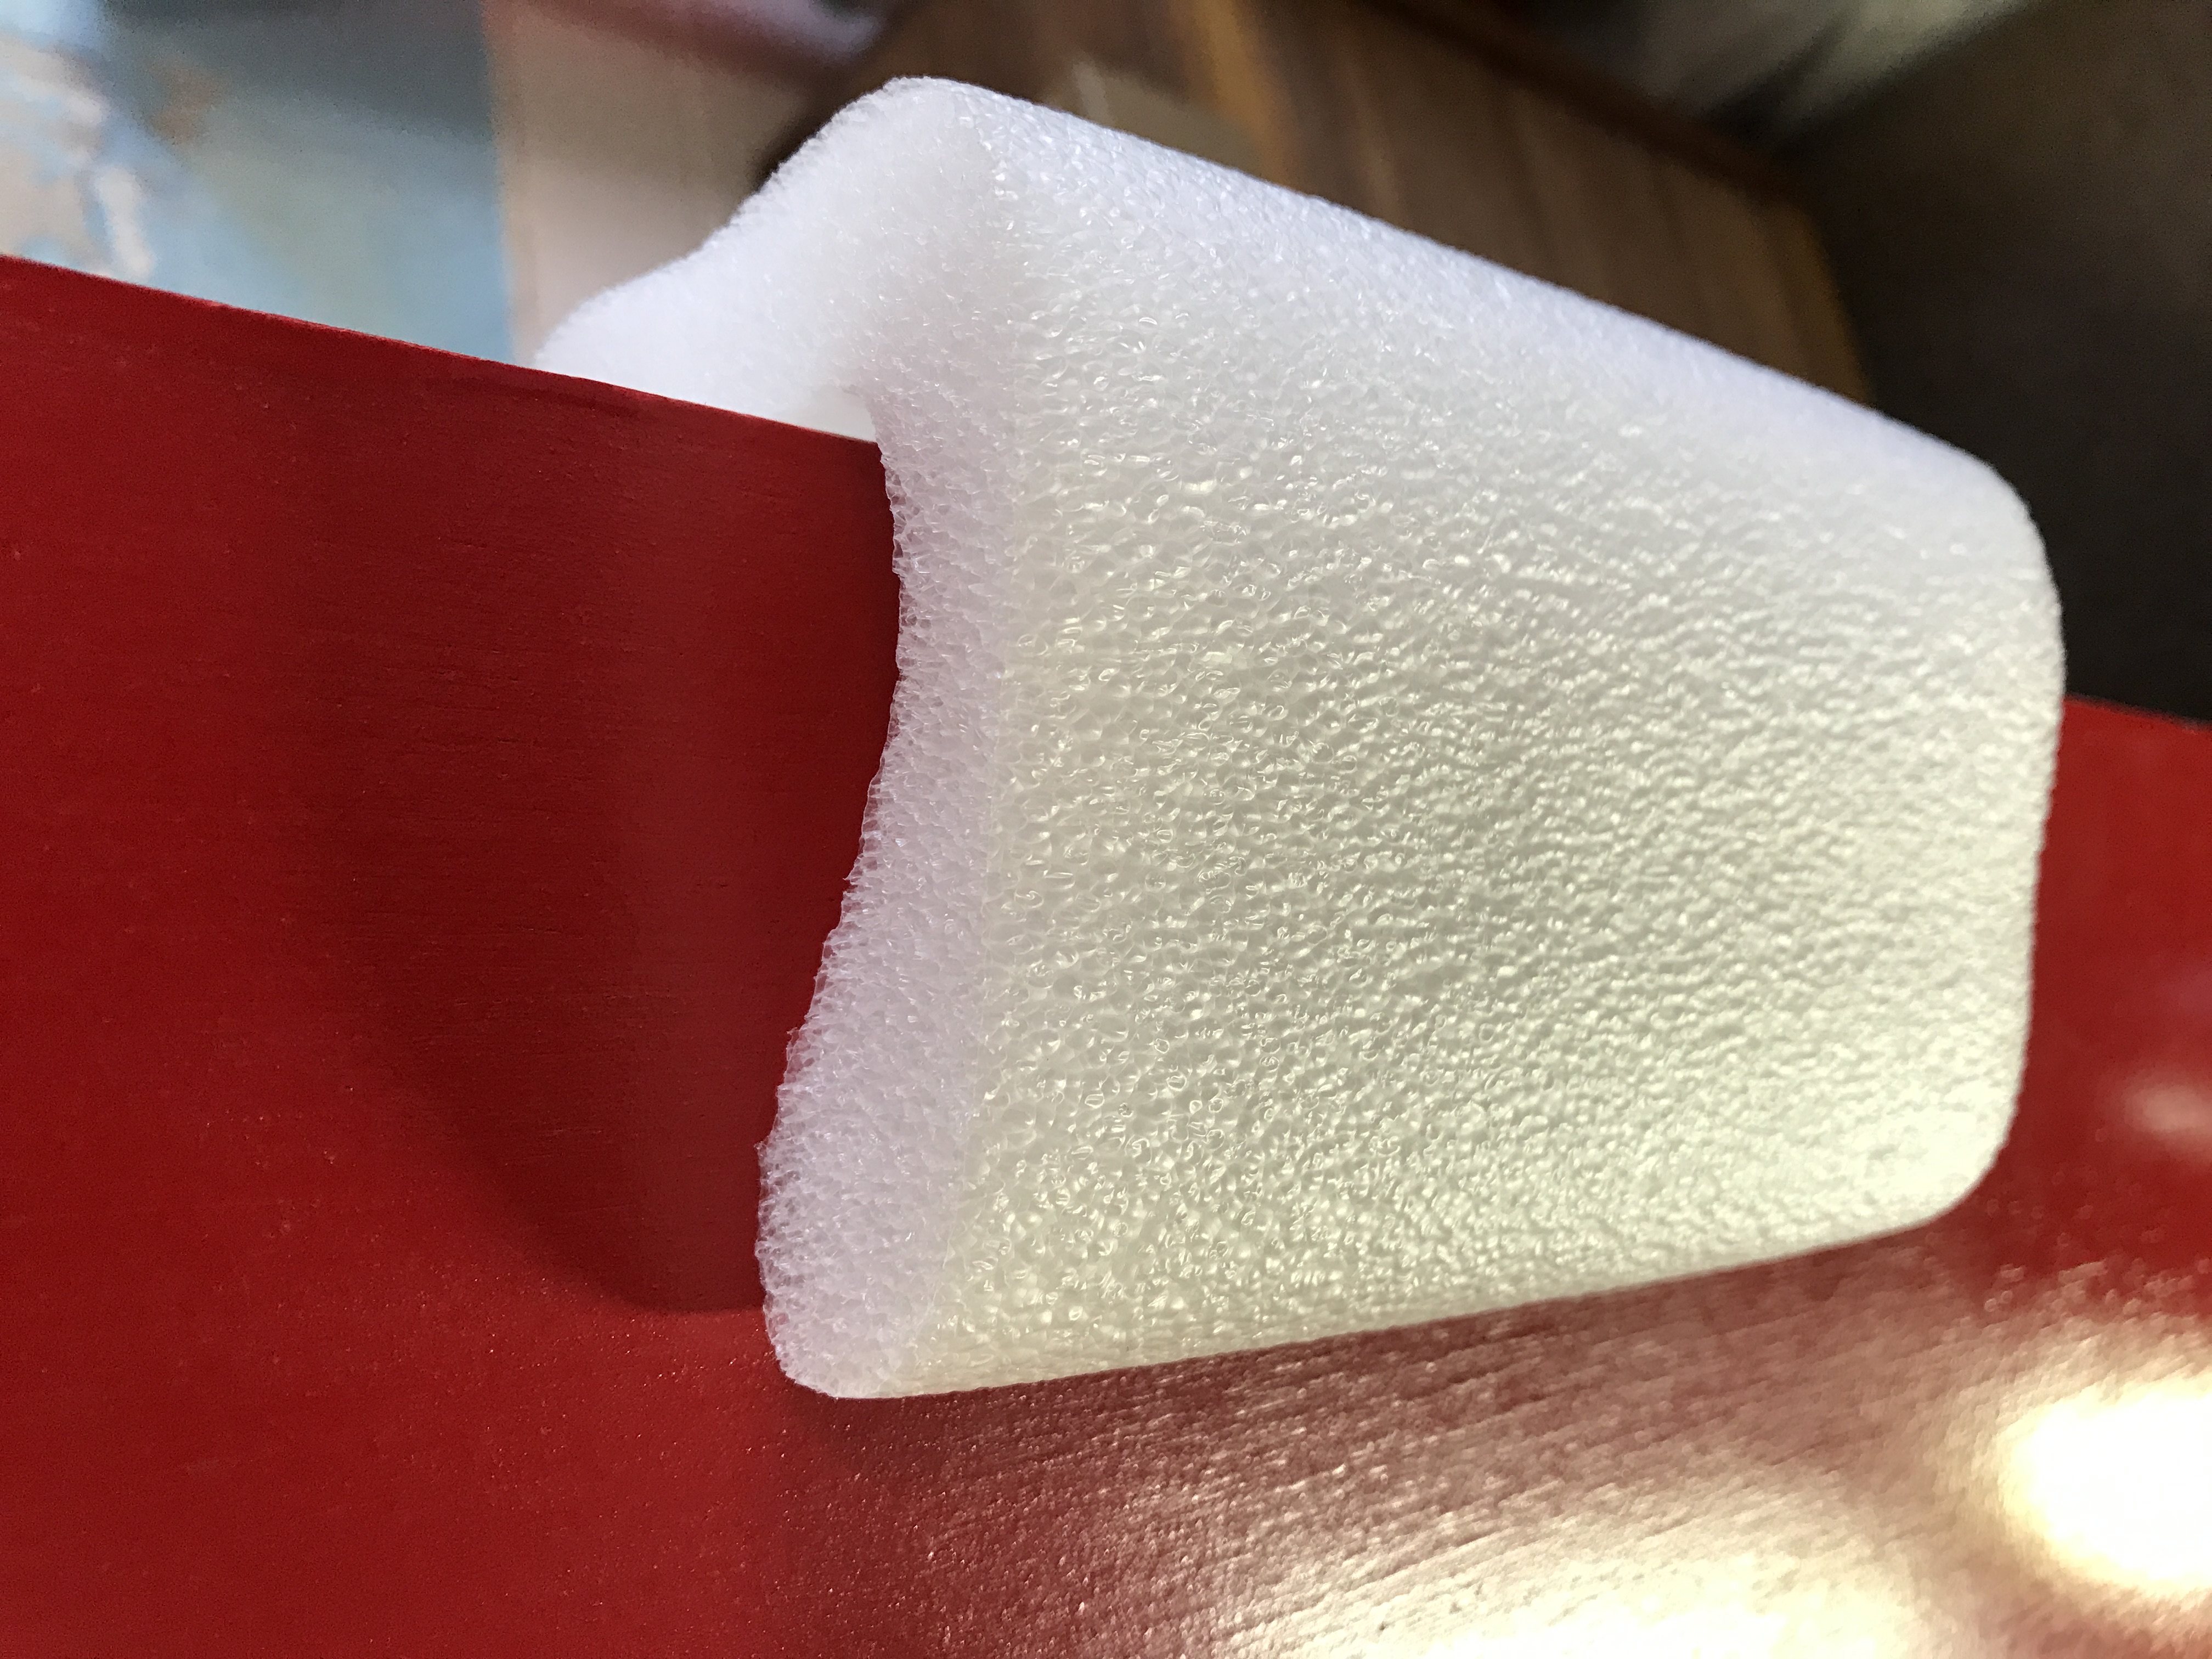 Thick Foam Profiles designed to protect edges of products